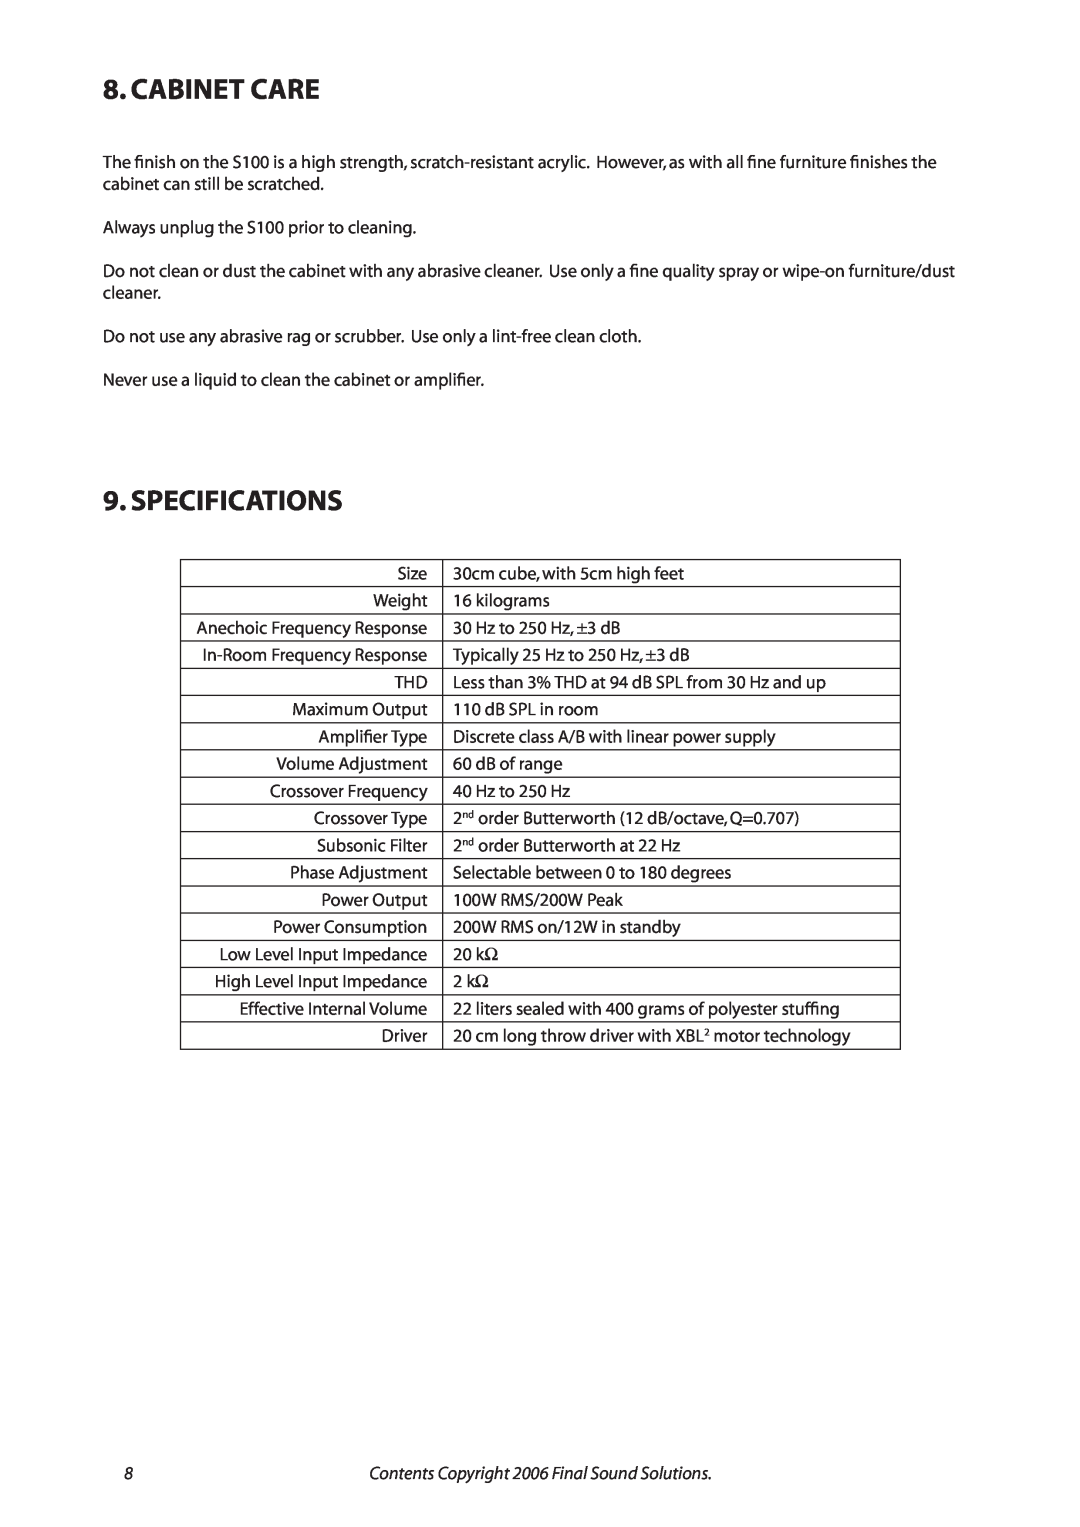 Final Sound S100 user manual Cabinet Care, Specifications 